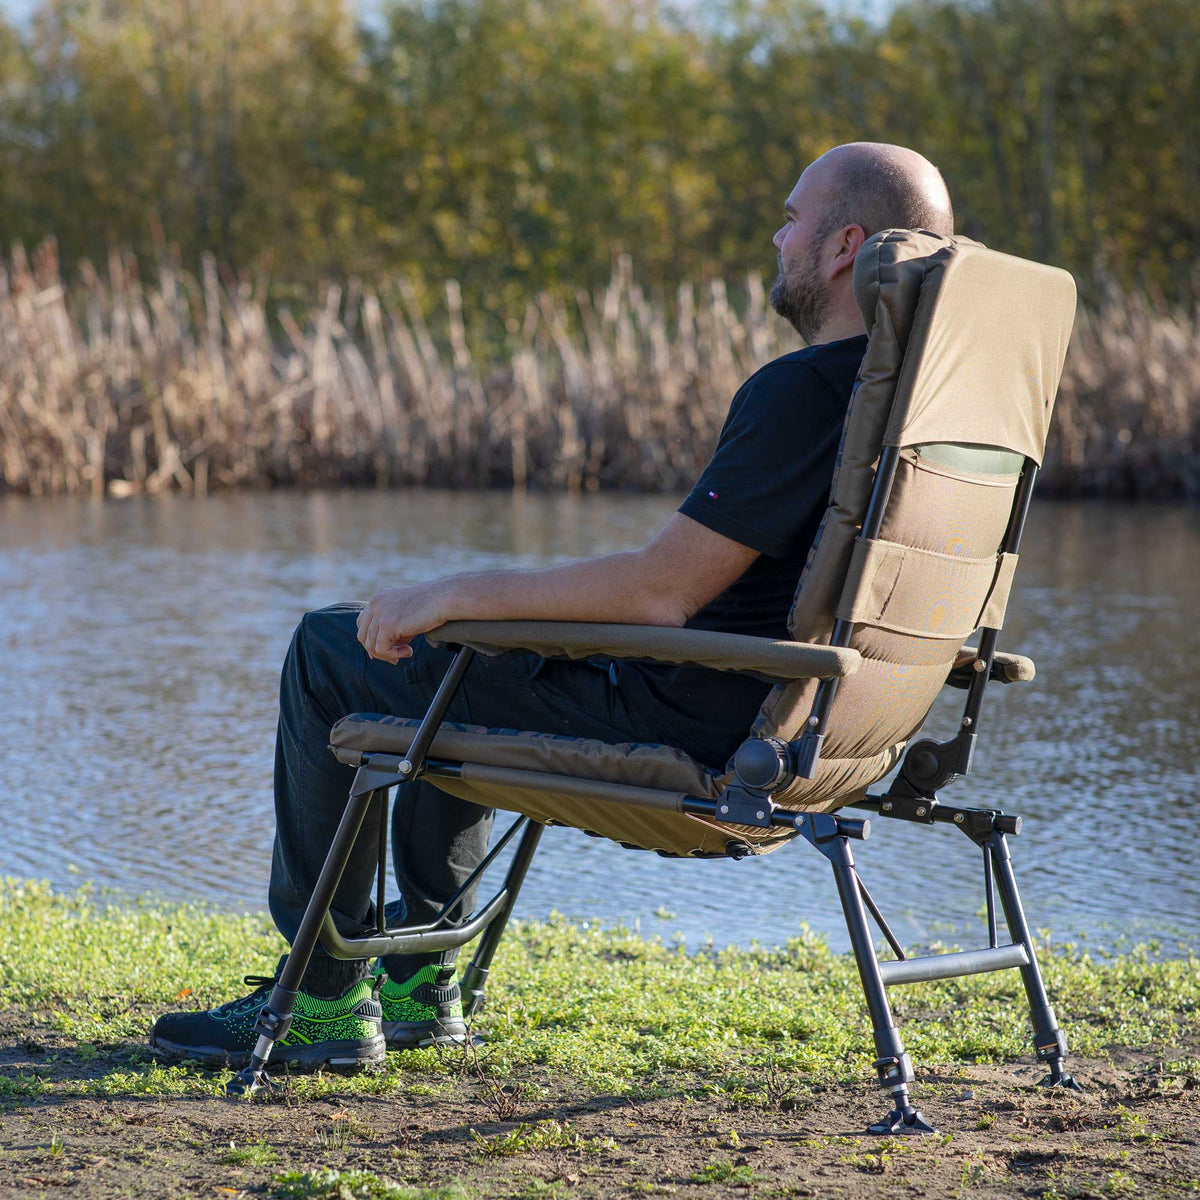 Deluxe Portable Fishing Chair, Reclining, Padded Armrests